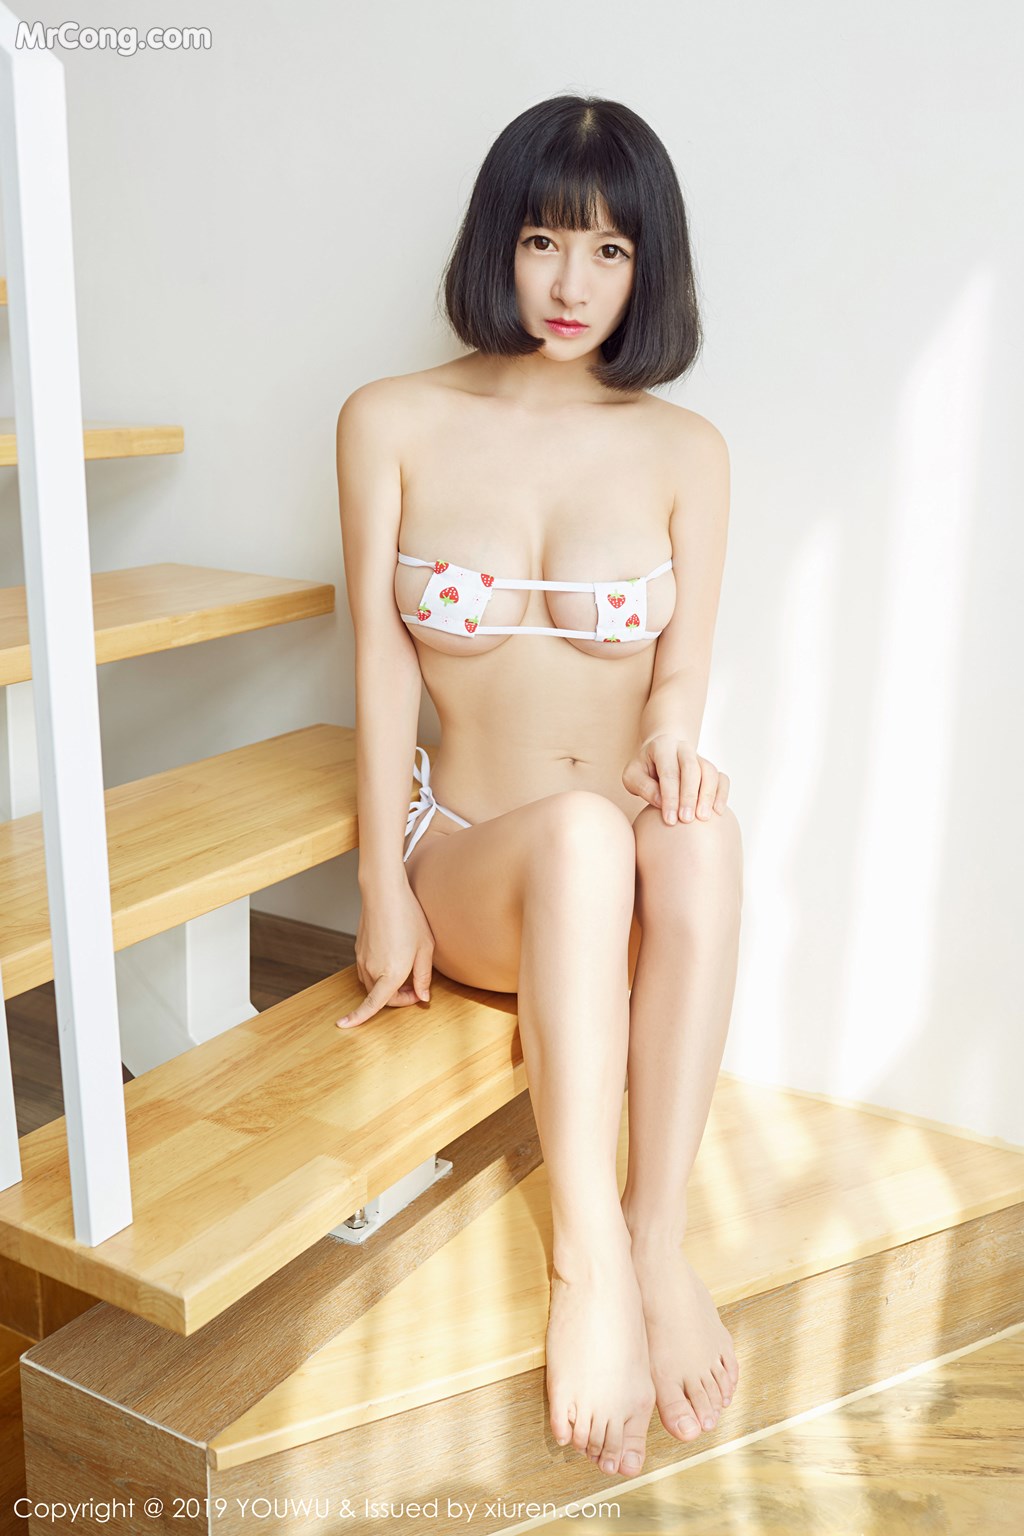 YouWu Vol.146: Xiao Tan Ge (小 探戈 -) (46 pictures) photo 1-1